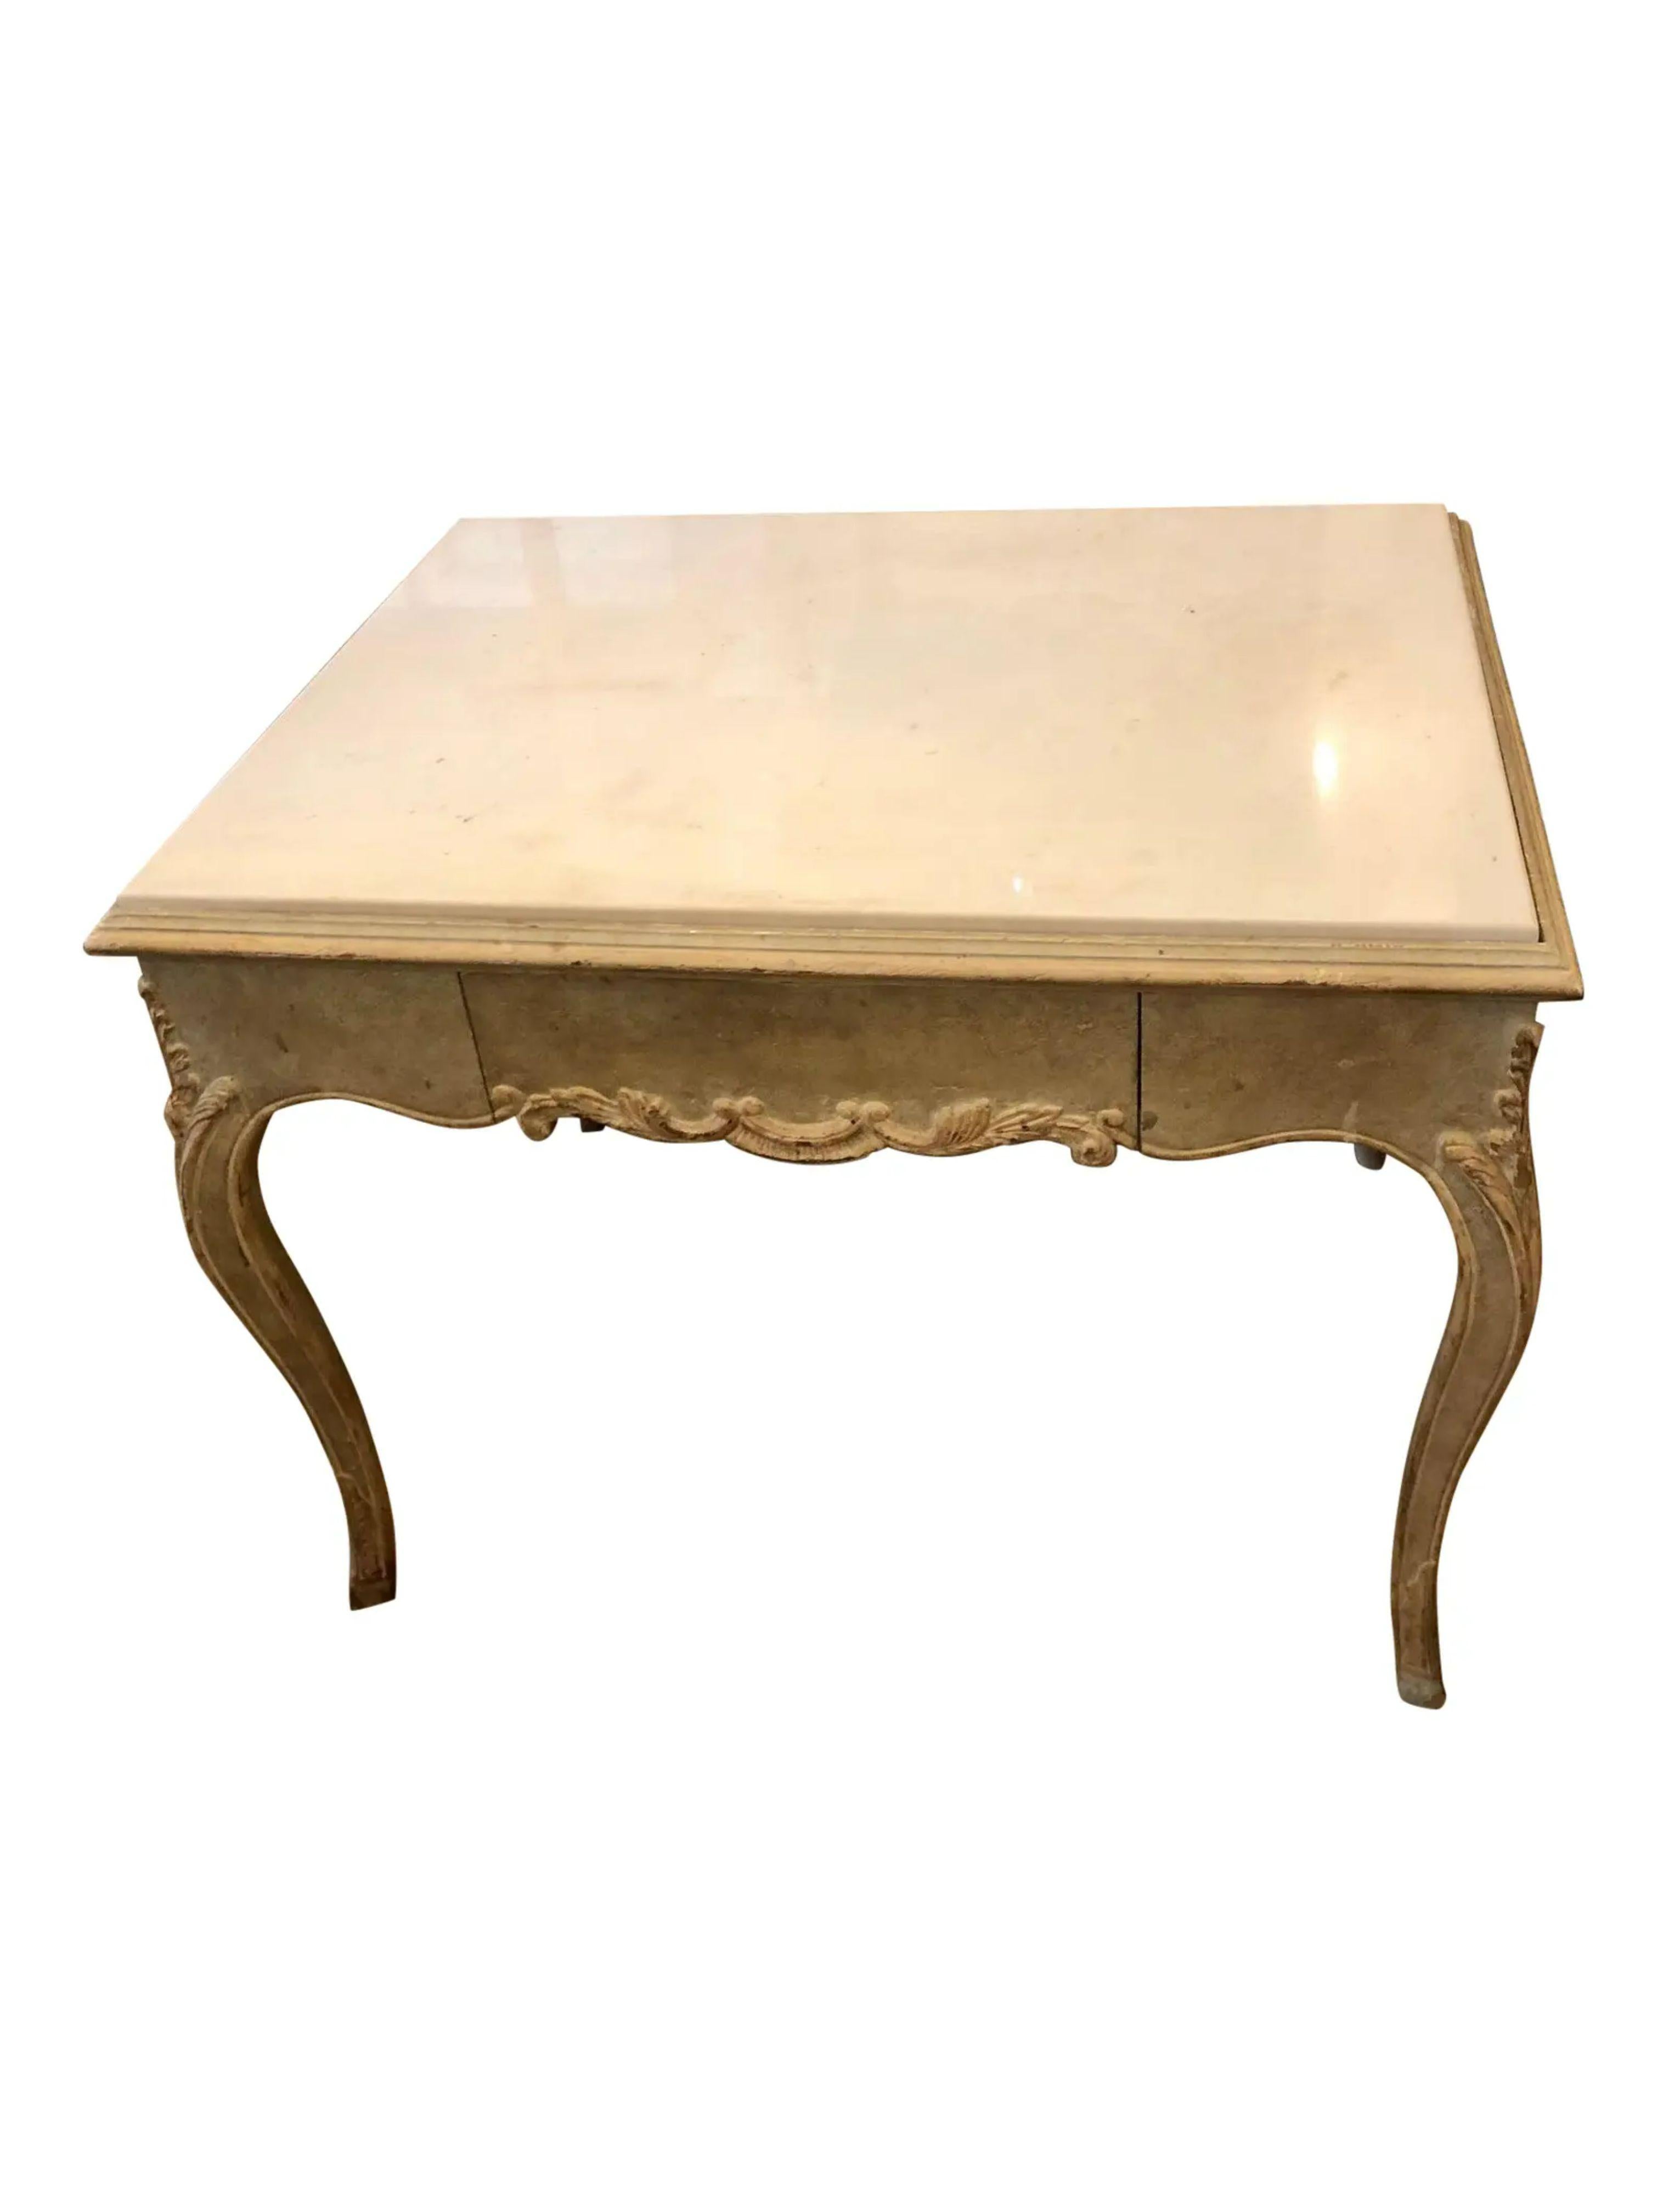 Antique Hideaway House Beverly hills marble top nightstand end or side table

Additional information: 
Materials: Marble, Wood
Color: Antique White
Period: 19th century
Styles: French Country, Italian
Item Type: Vintage, Antique or